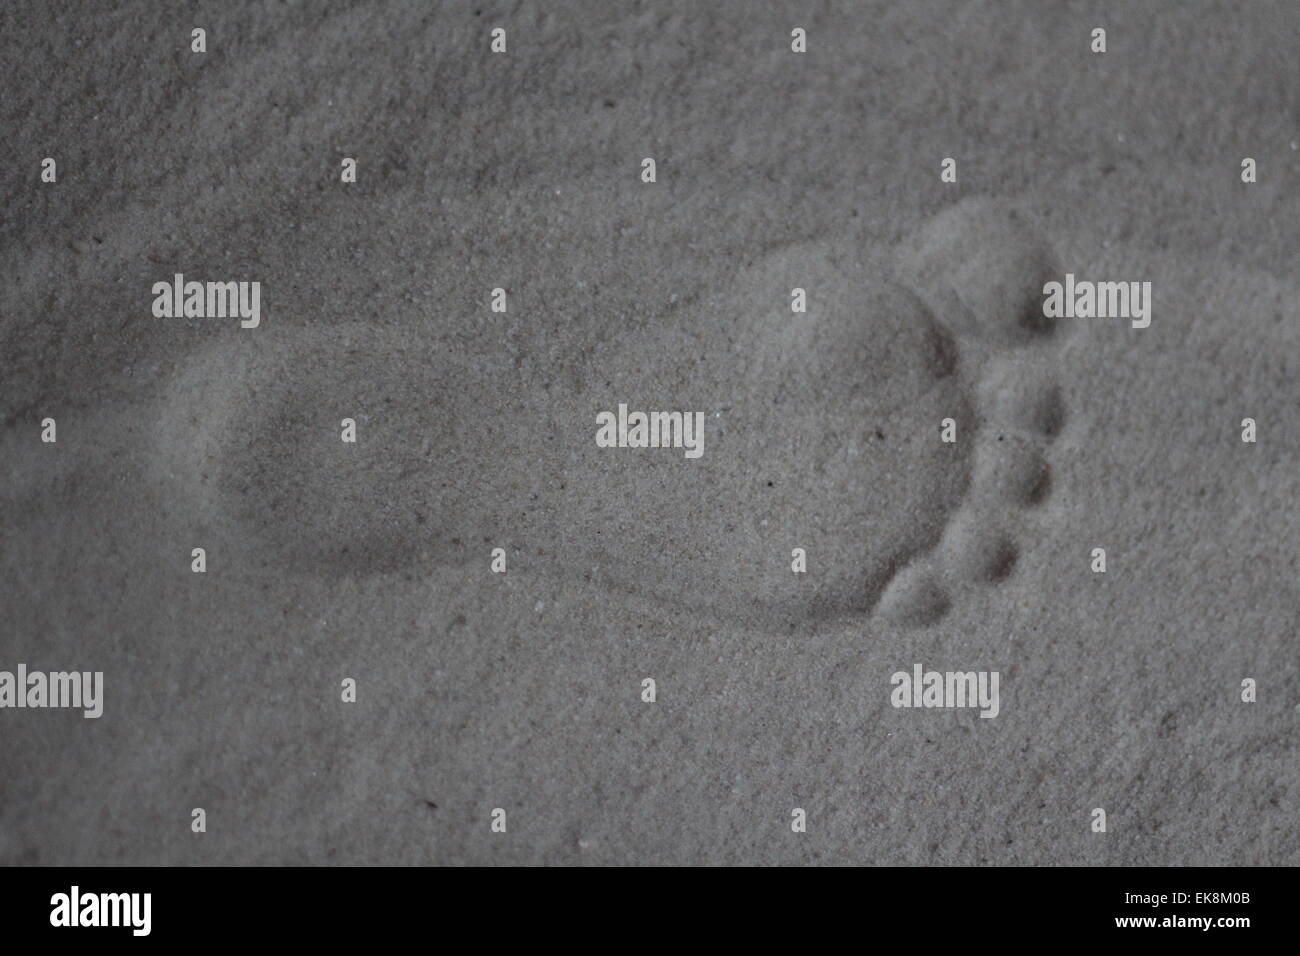 Footstep in the Sand Stock Photo